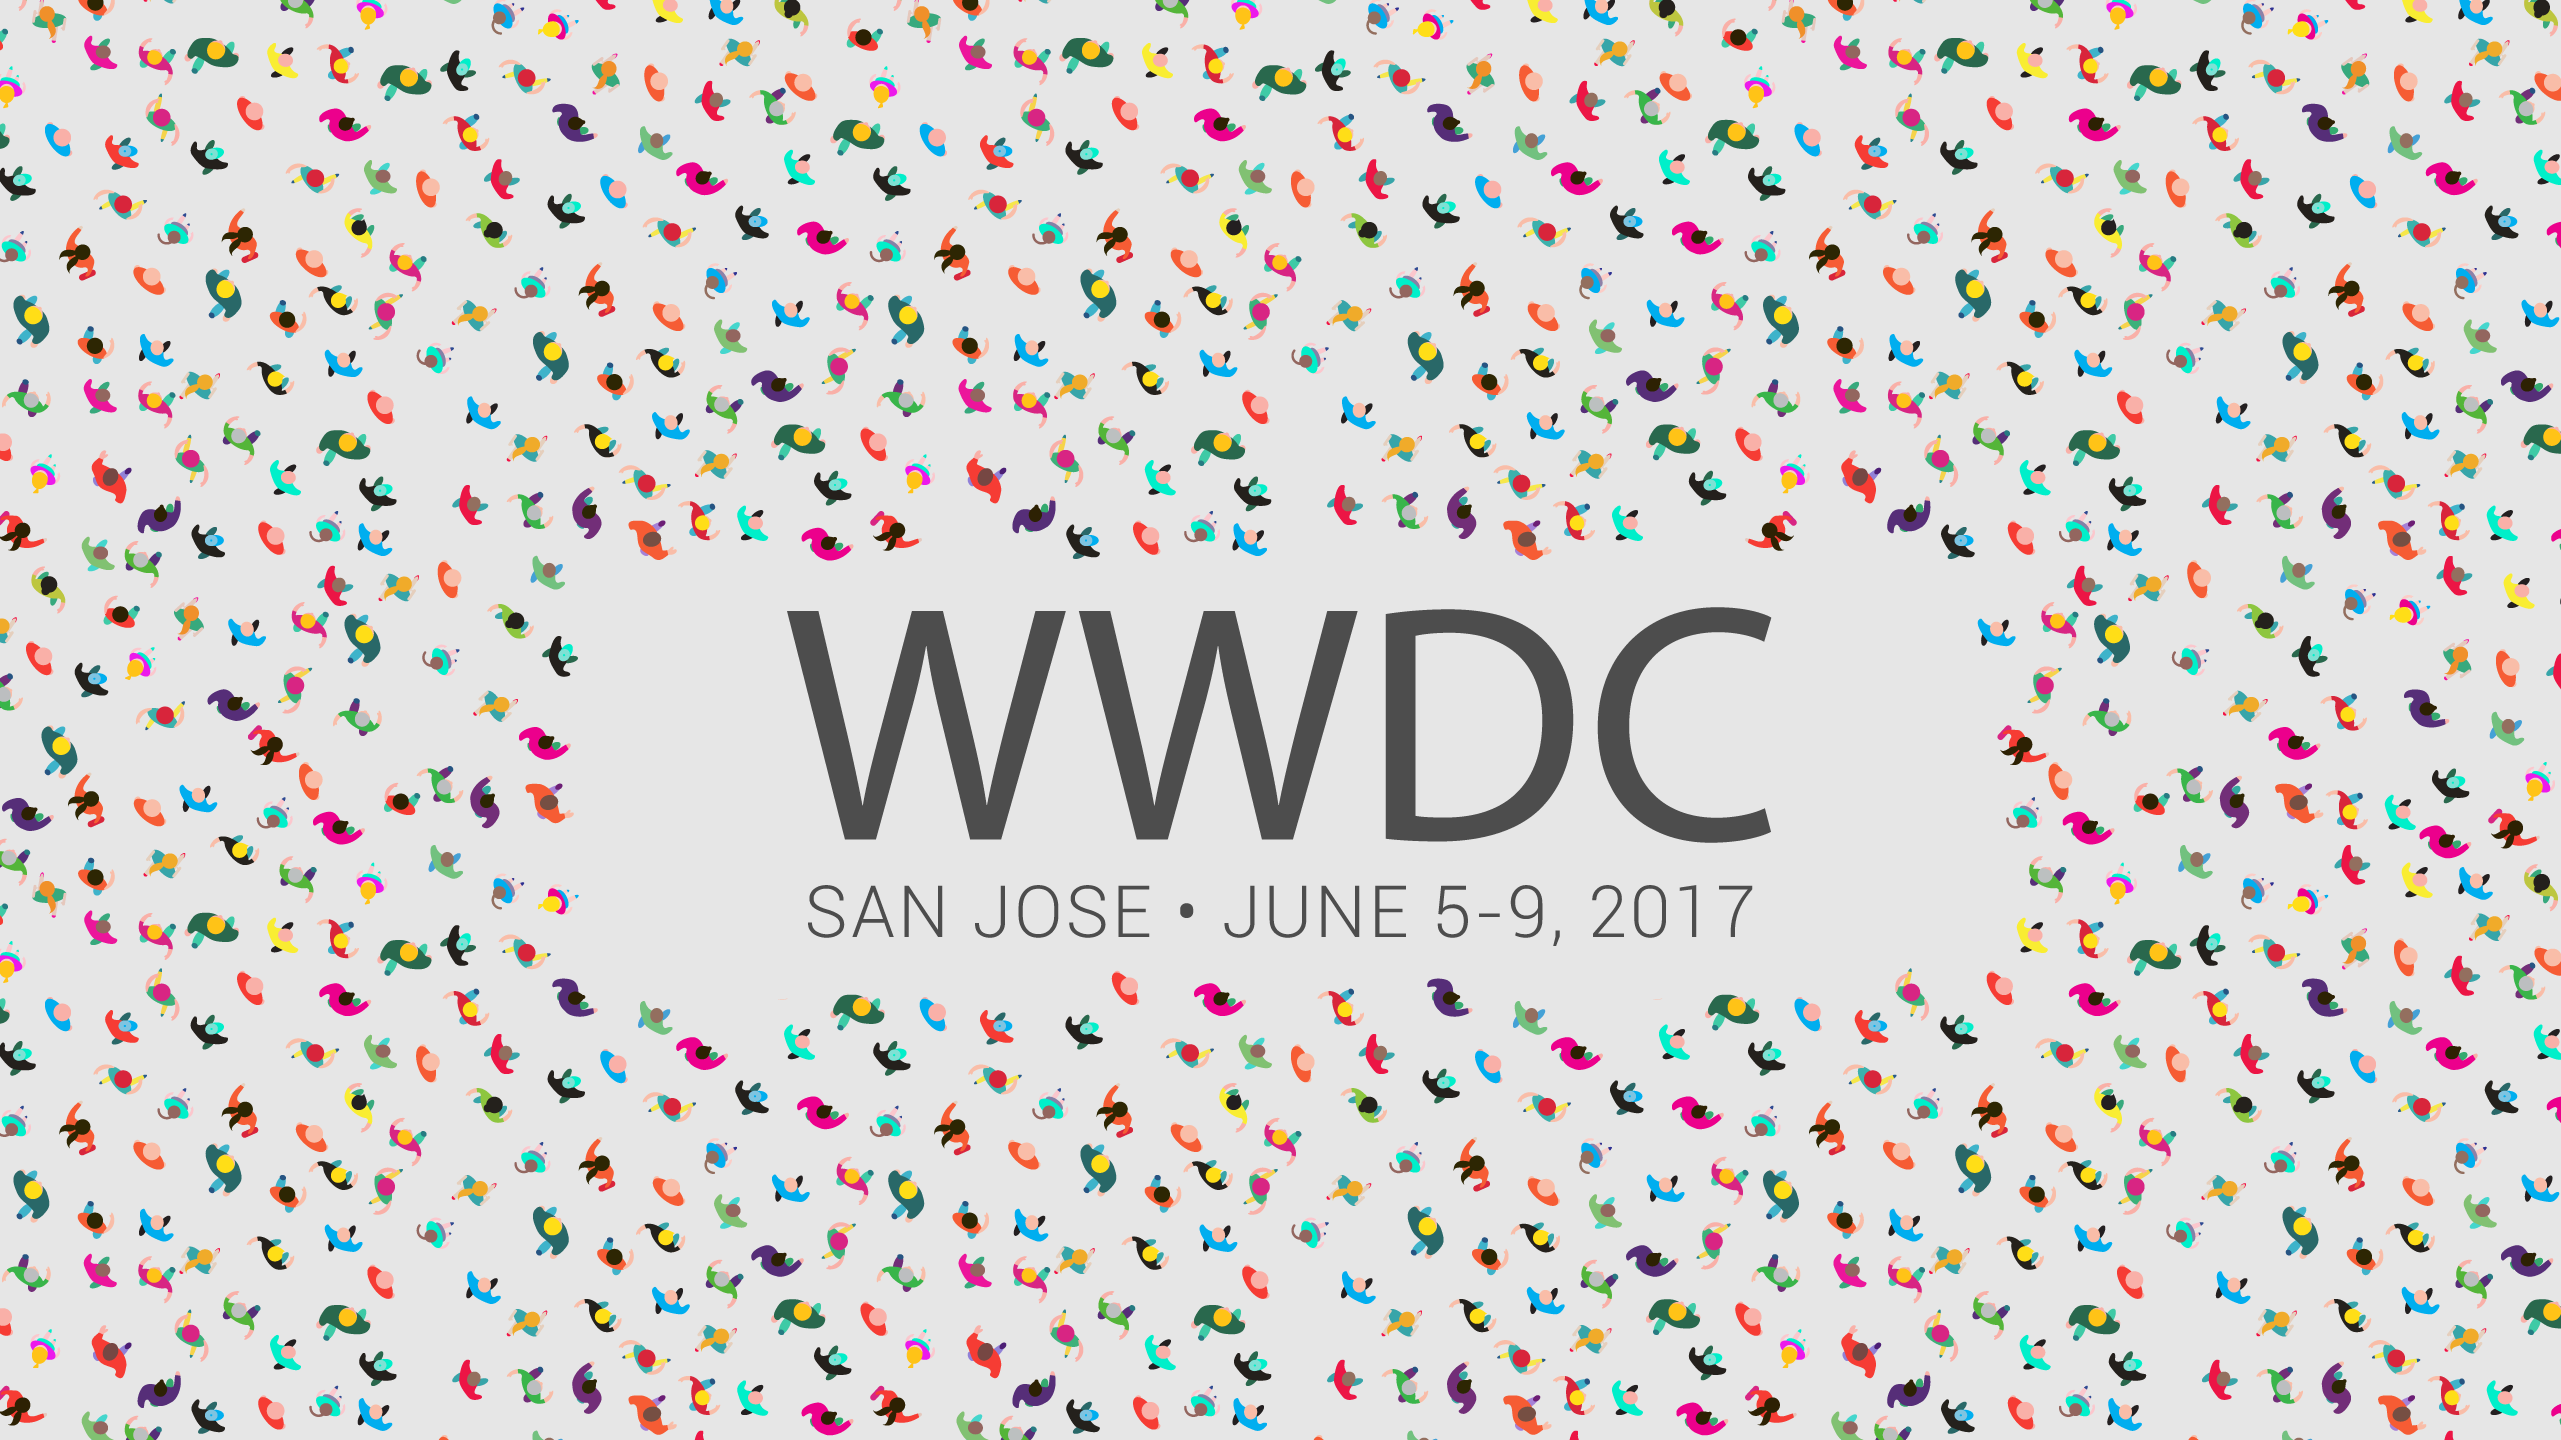 Apple’s WWDC17: An event lacking vision from a company without a visionary